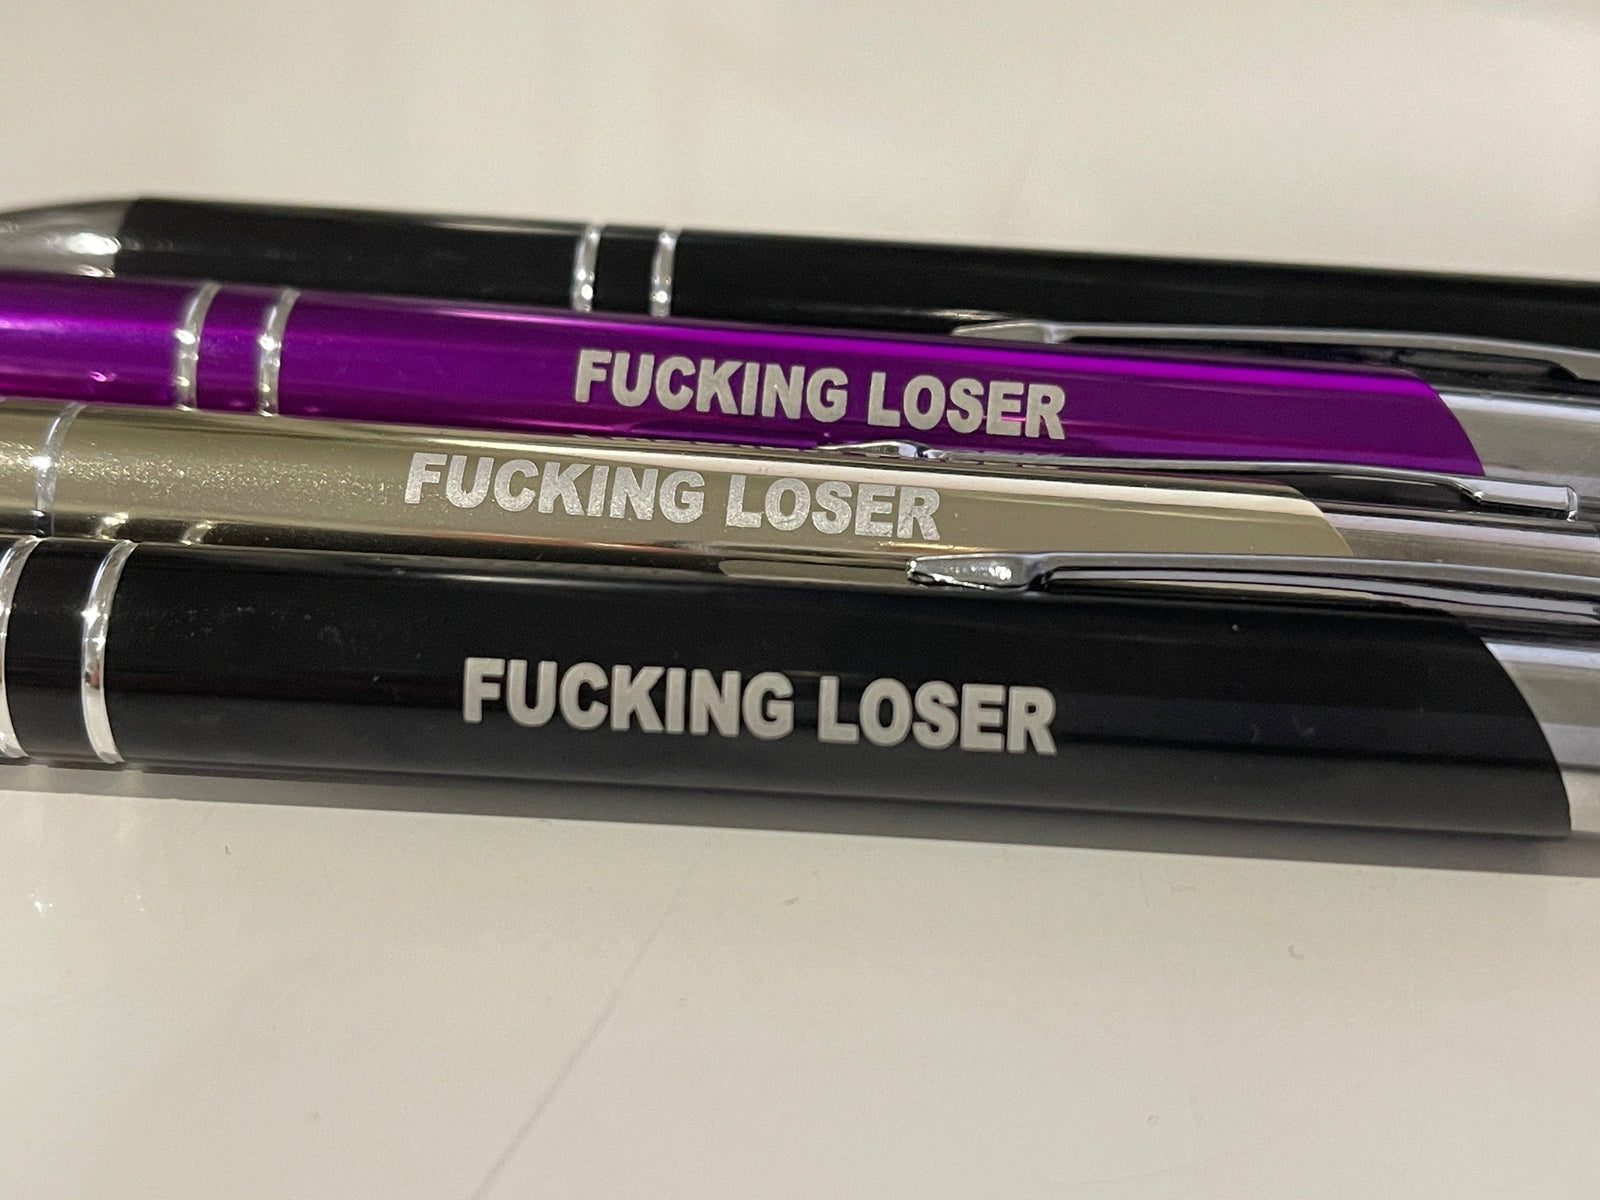 Inappropriate Pens - The Sweary Office Collection - The Inappropriate Gift  Co